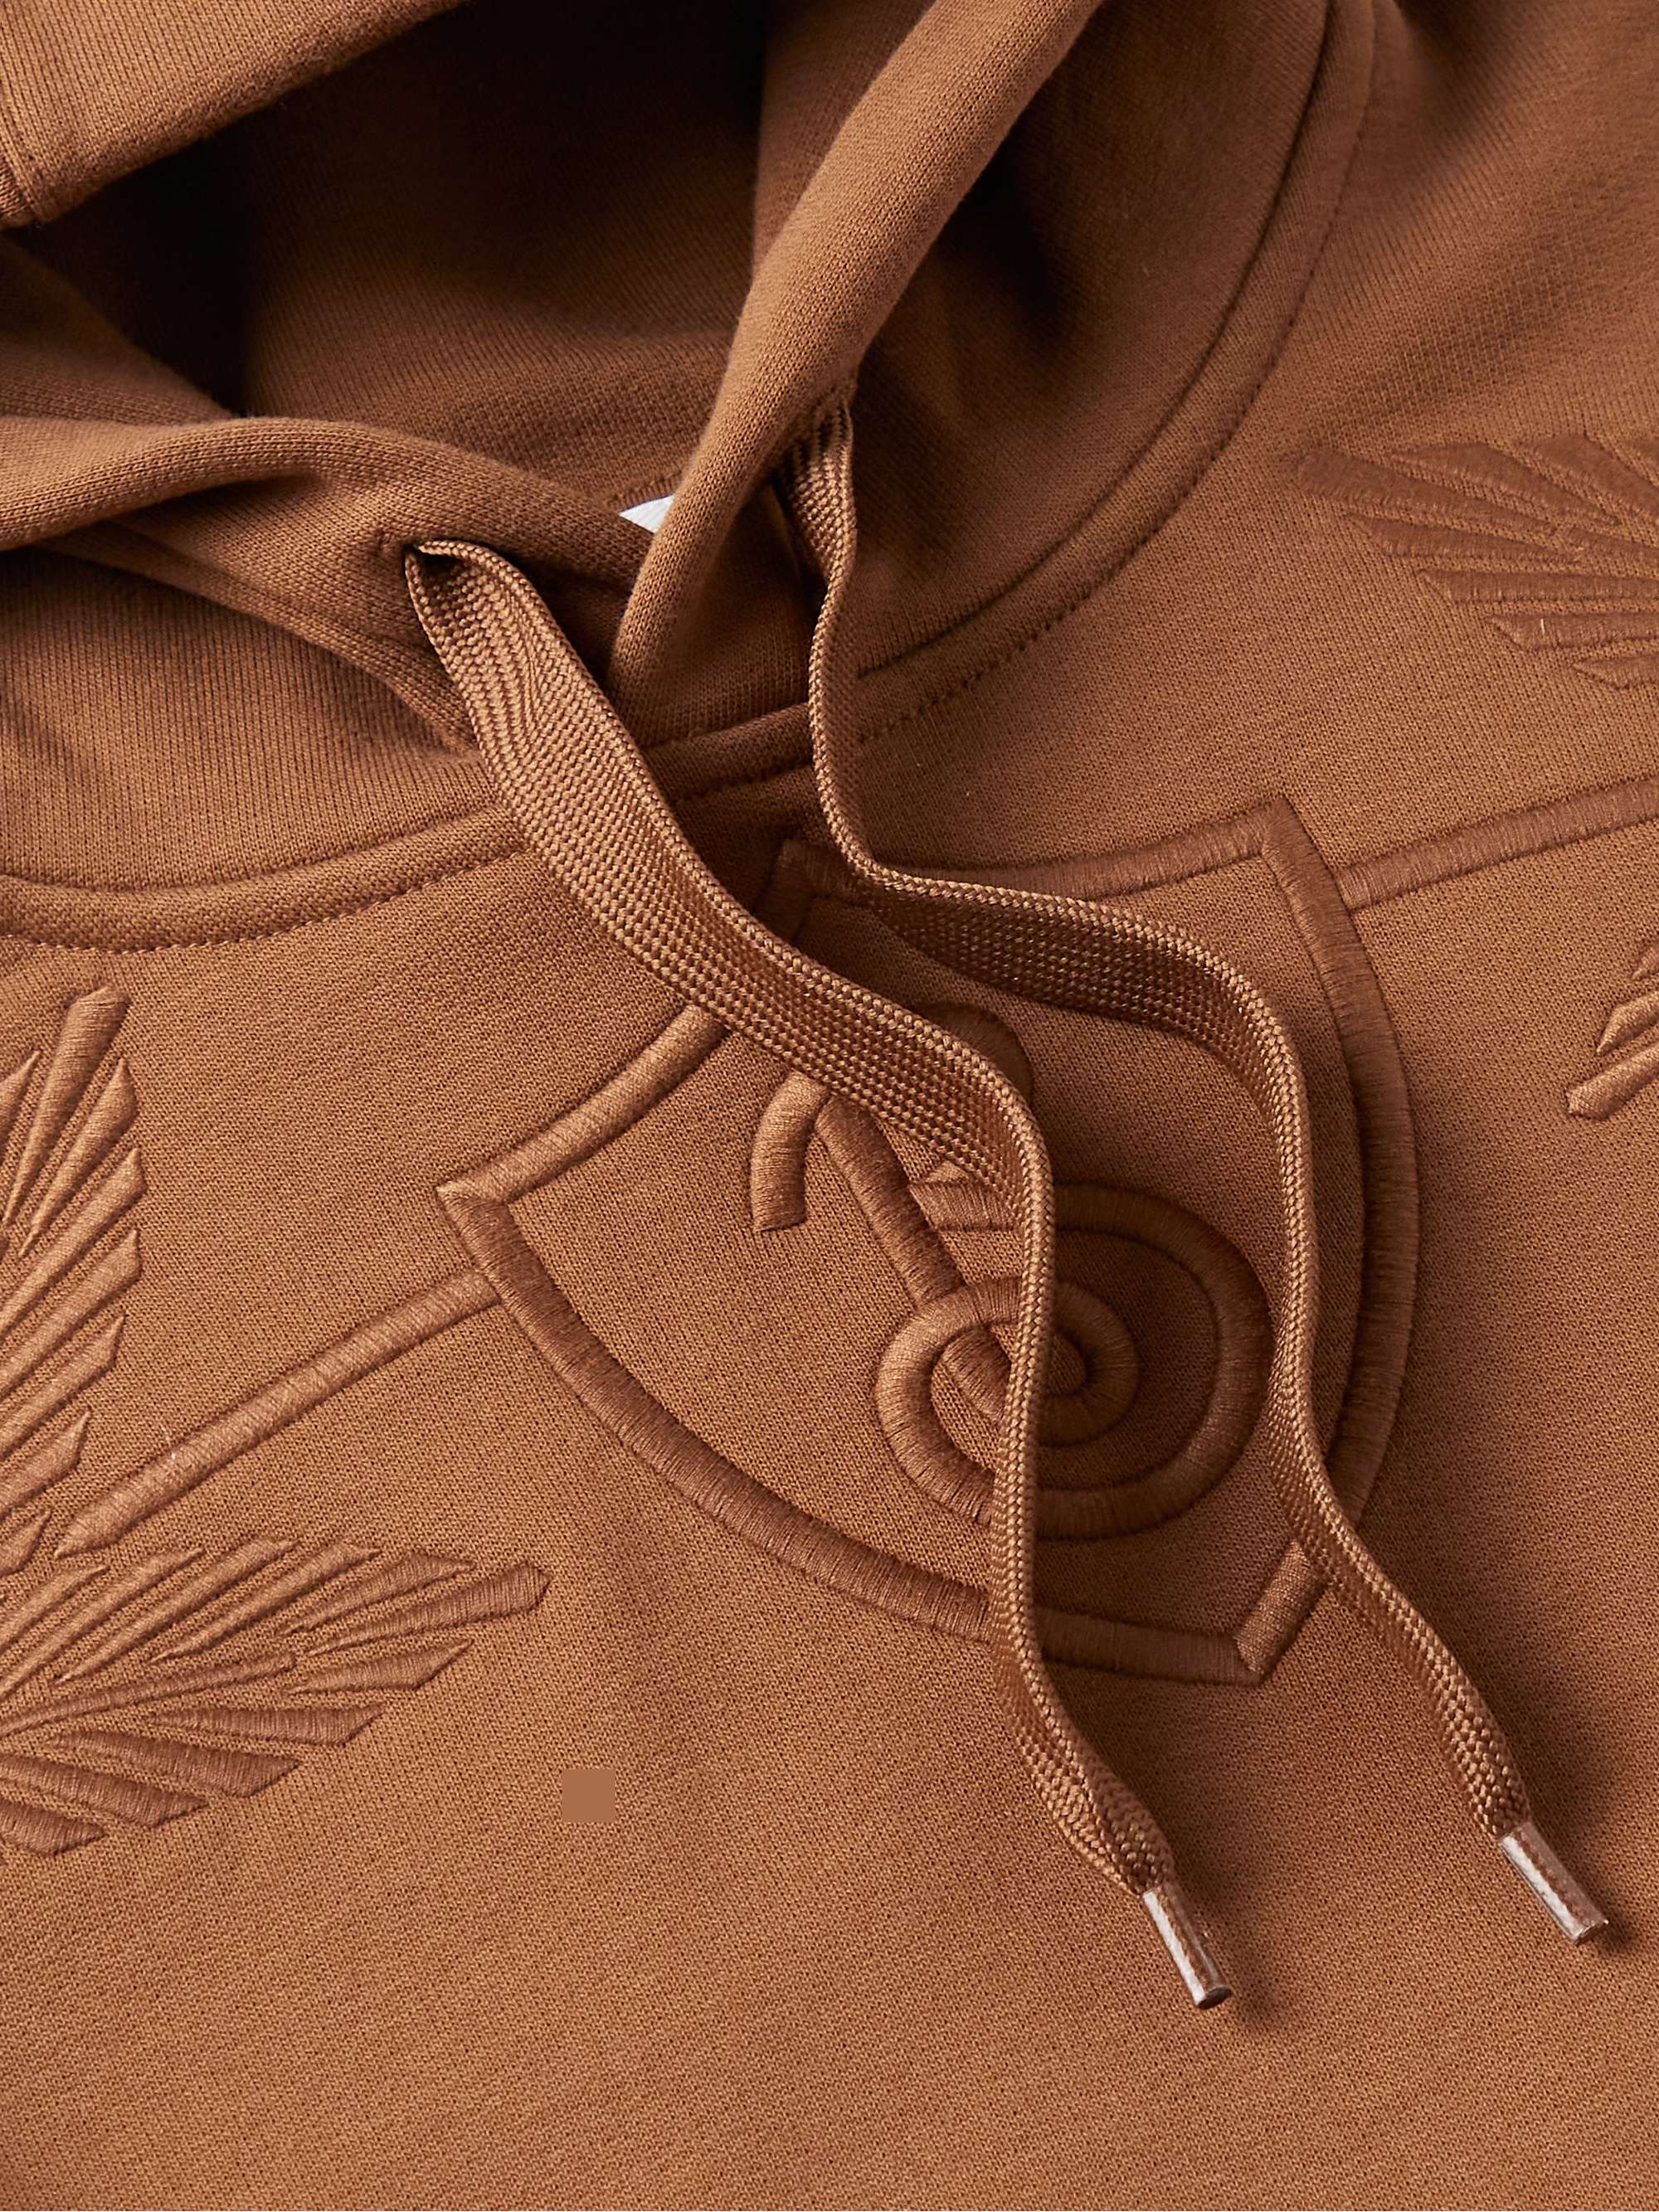 BURBERRY Logo-Embroidered Cotton-Jersey Hoodie